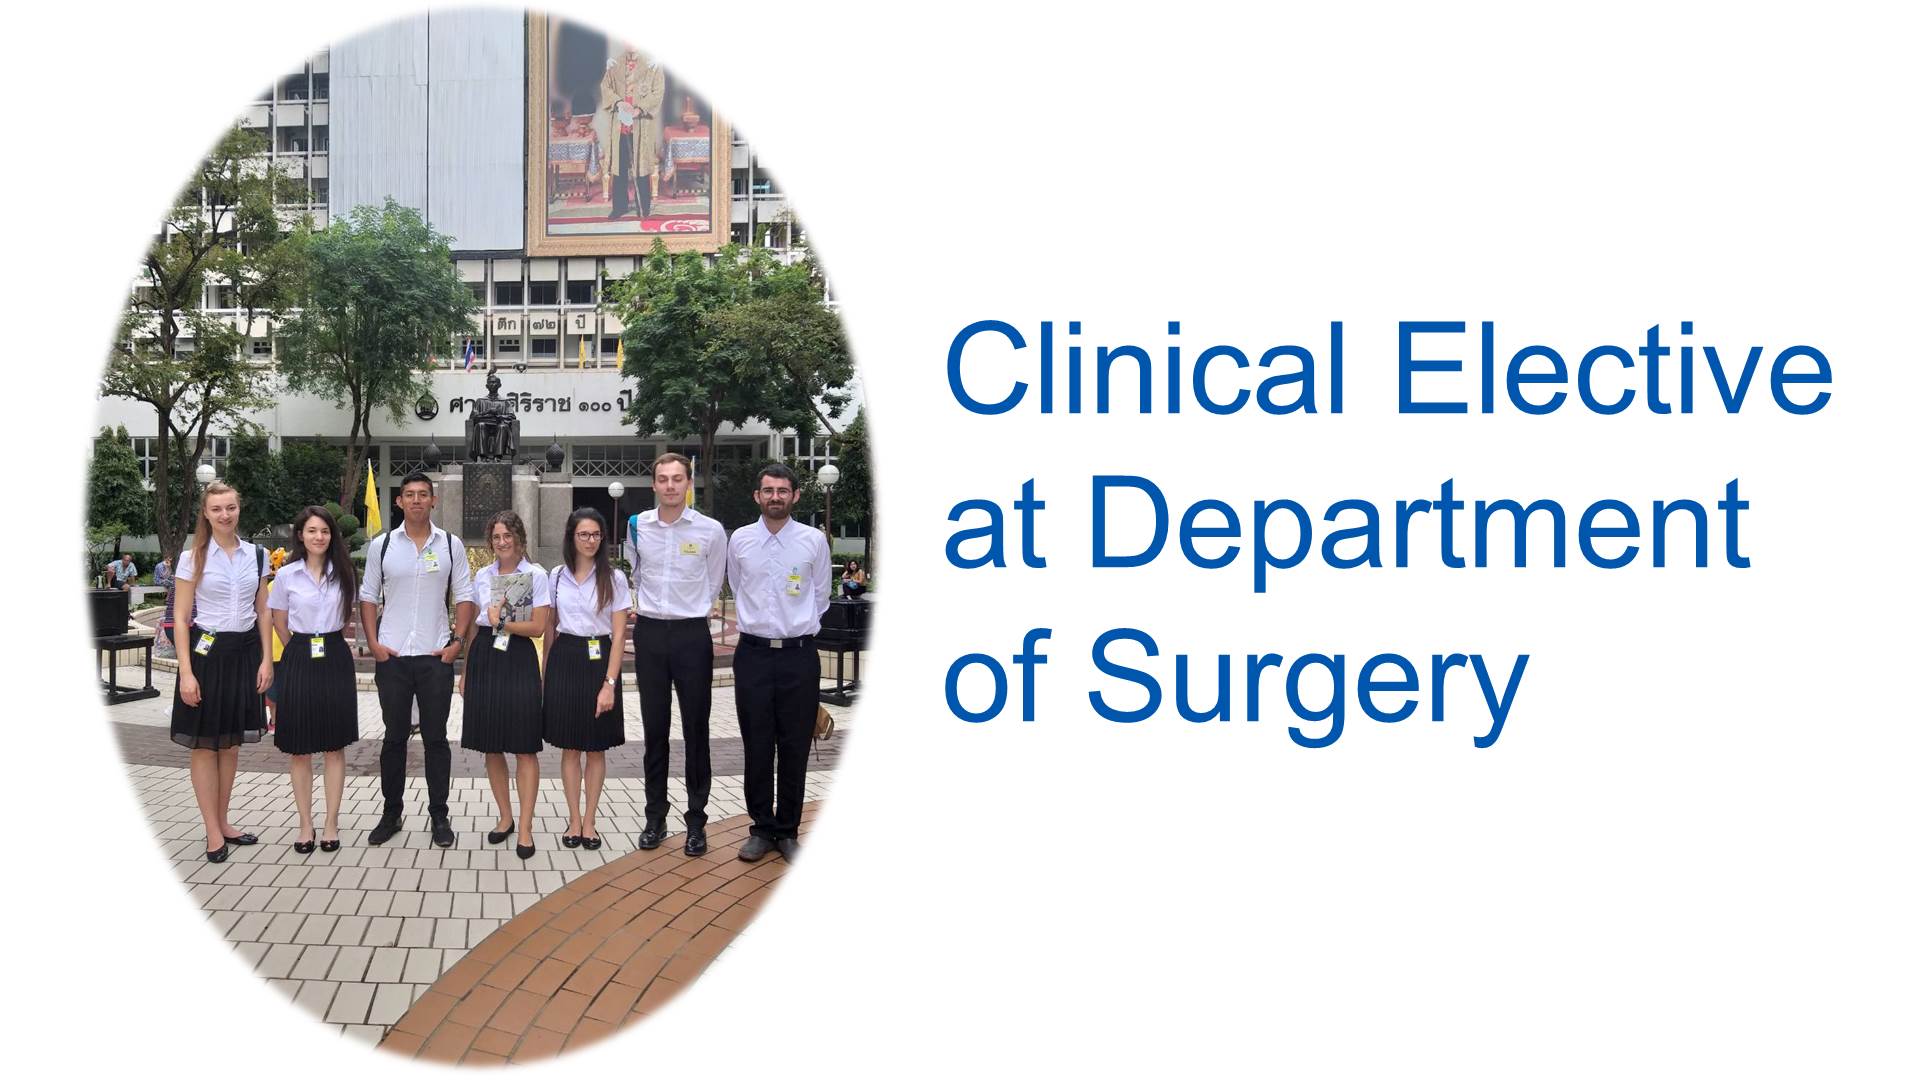 Elective Study at Department of Surgery